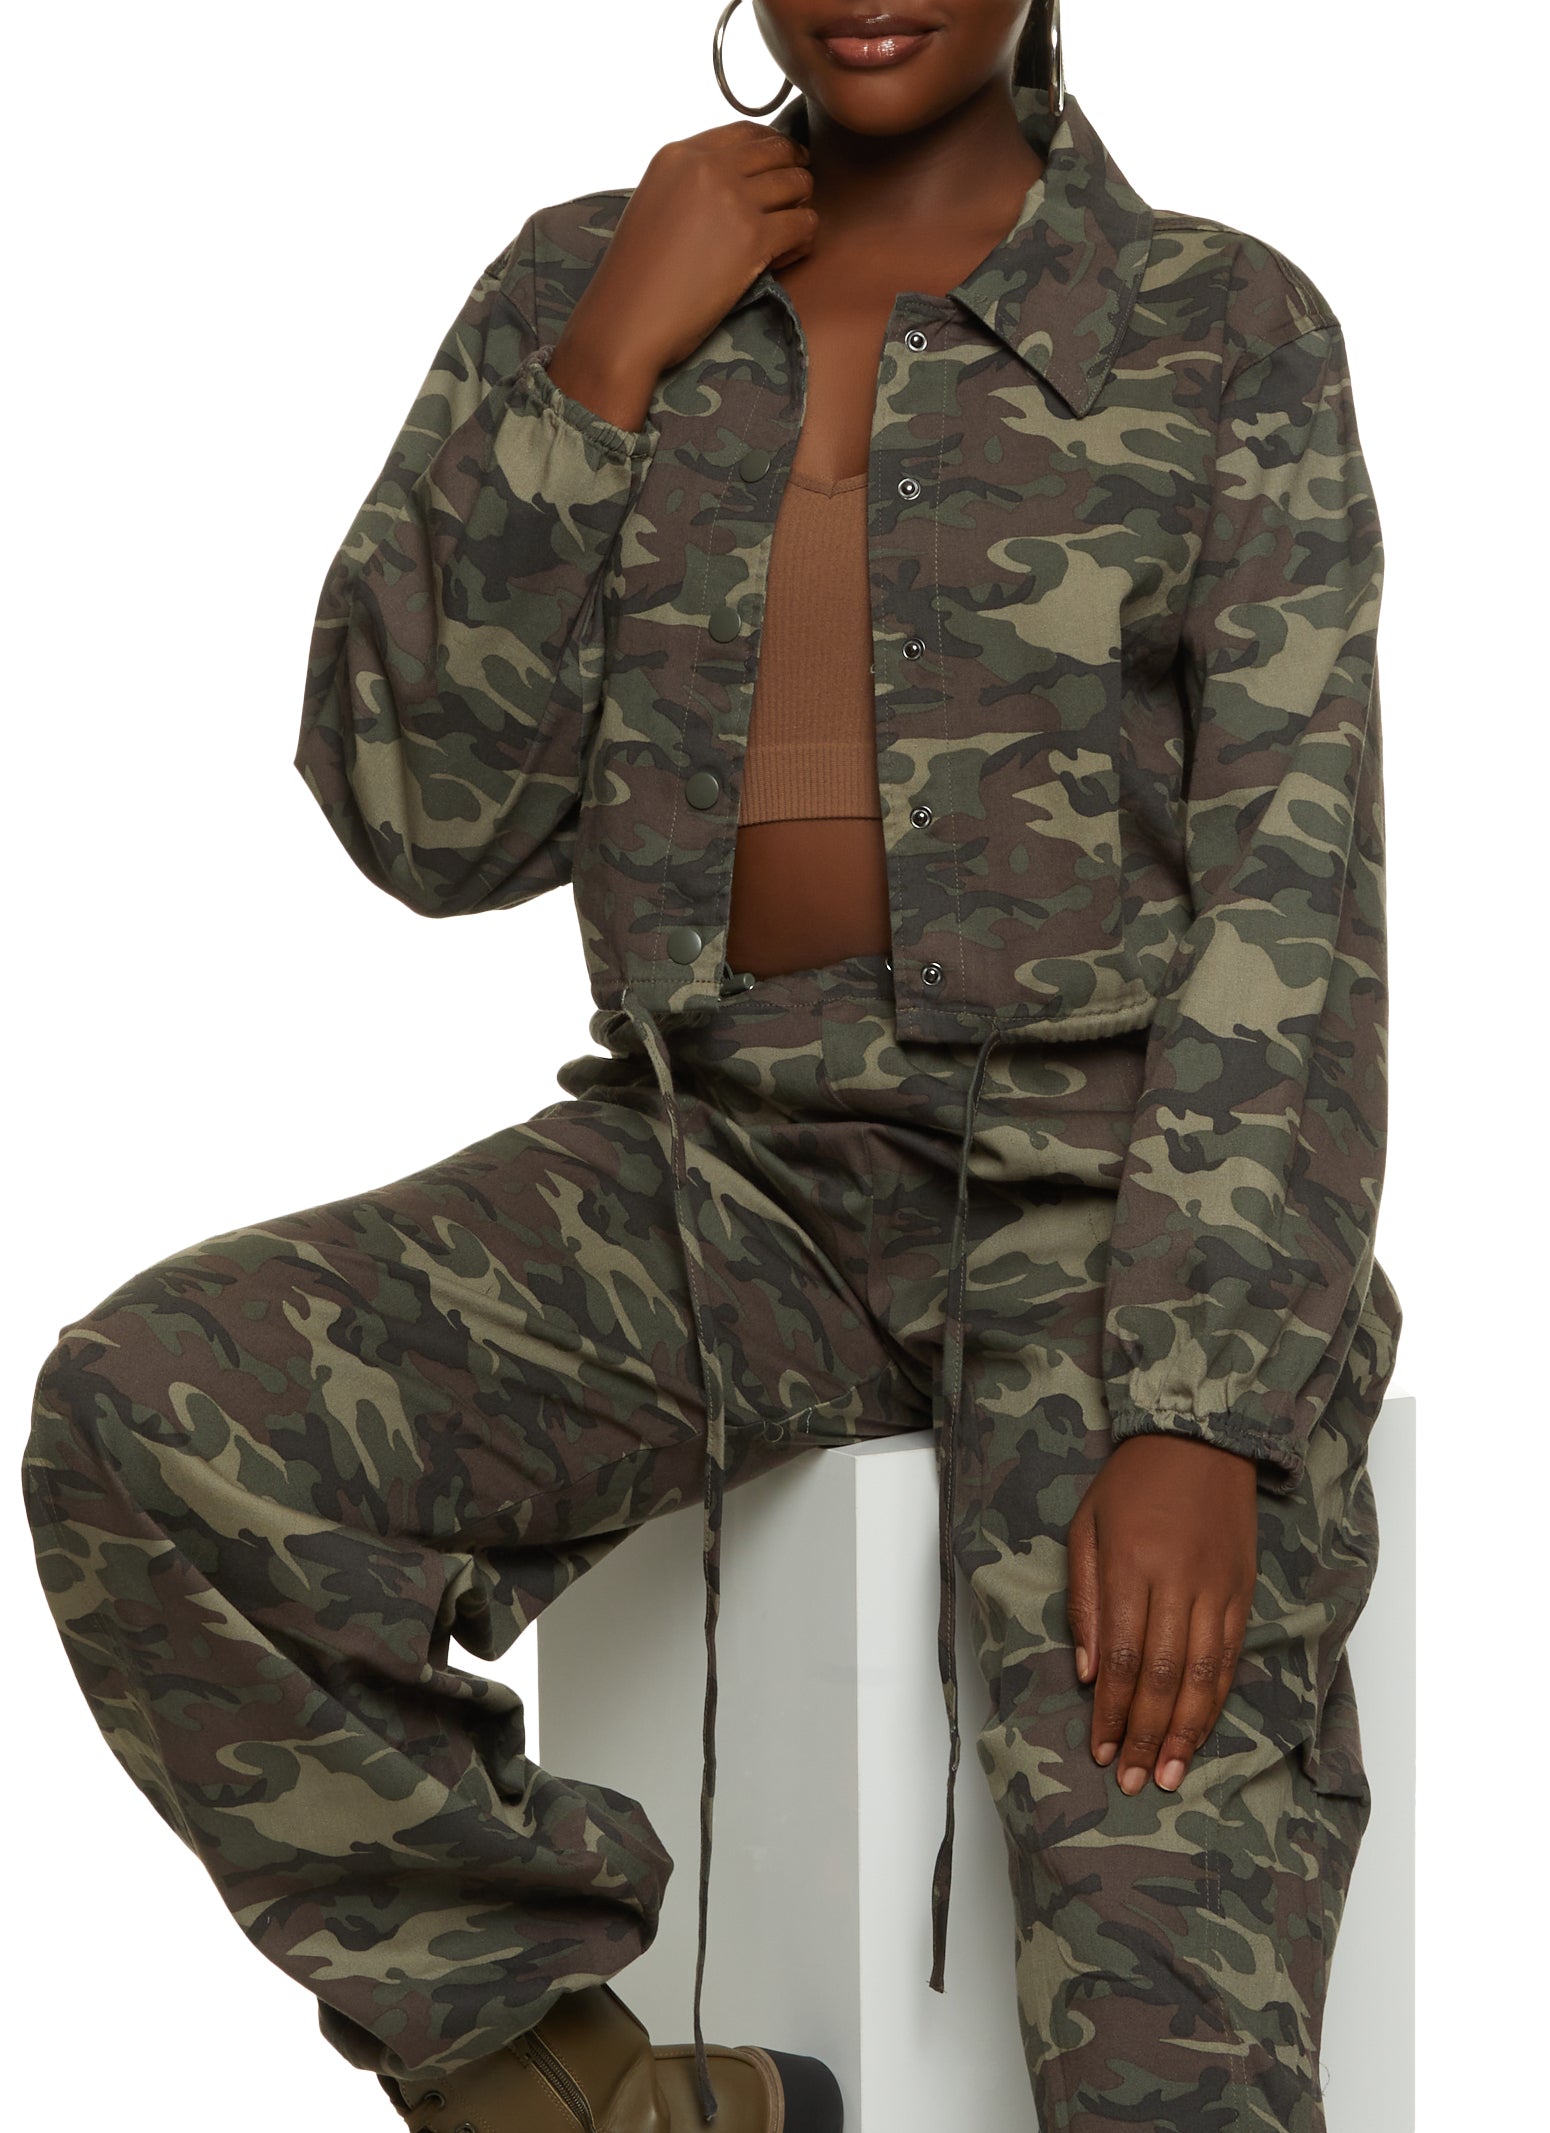 Camouflage Jacket for Women Camo Midi Coat With Hood Military